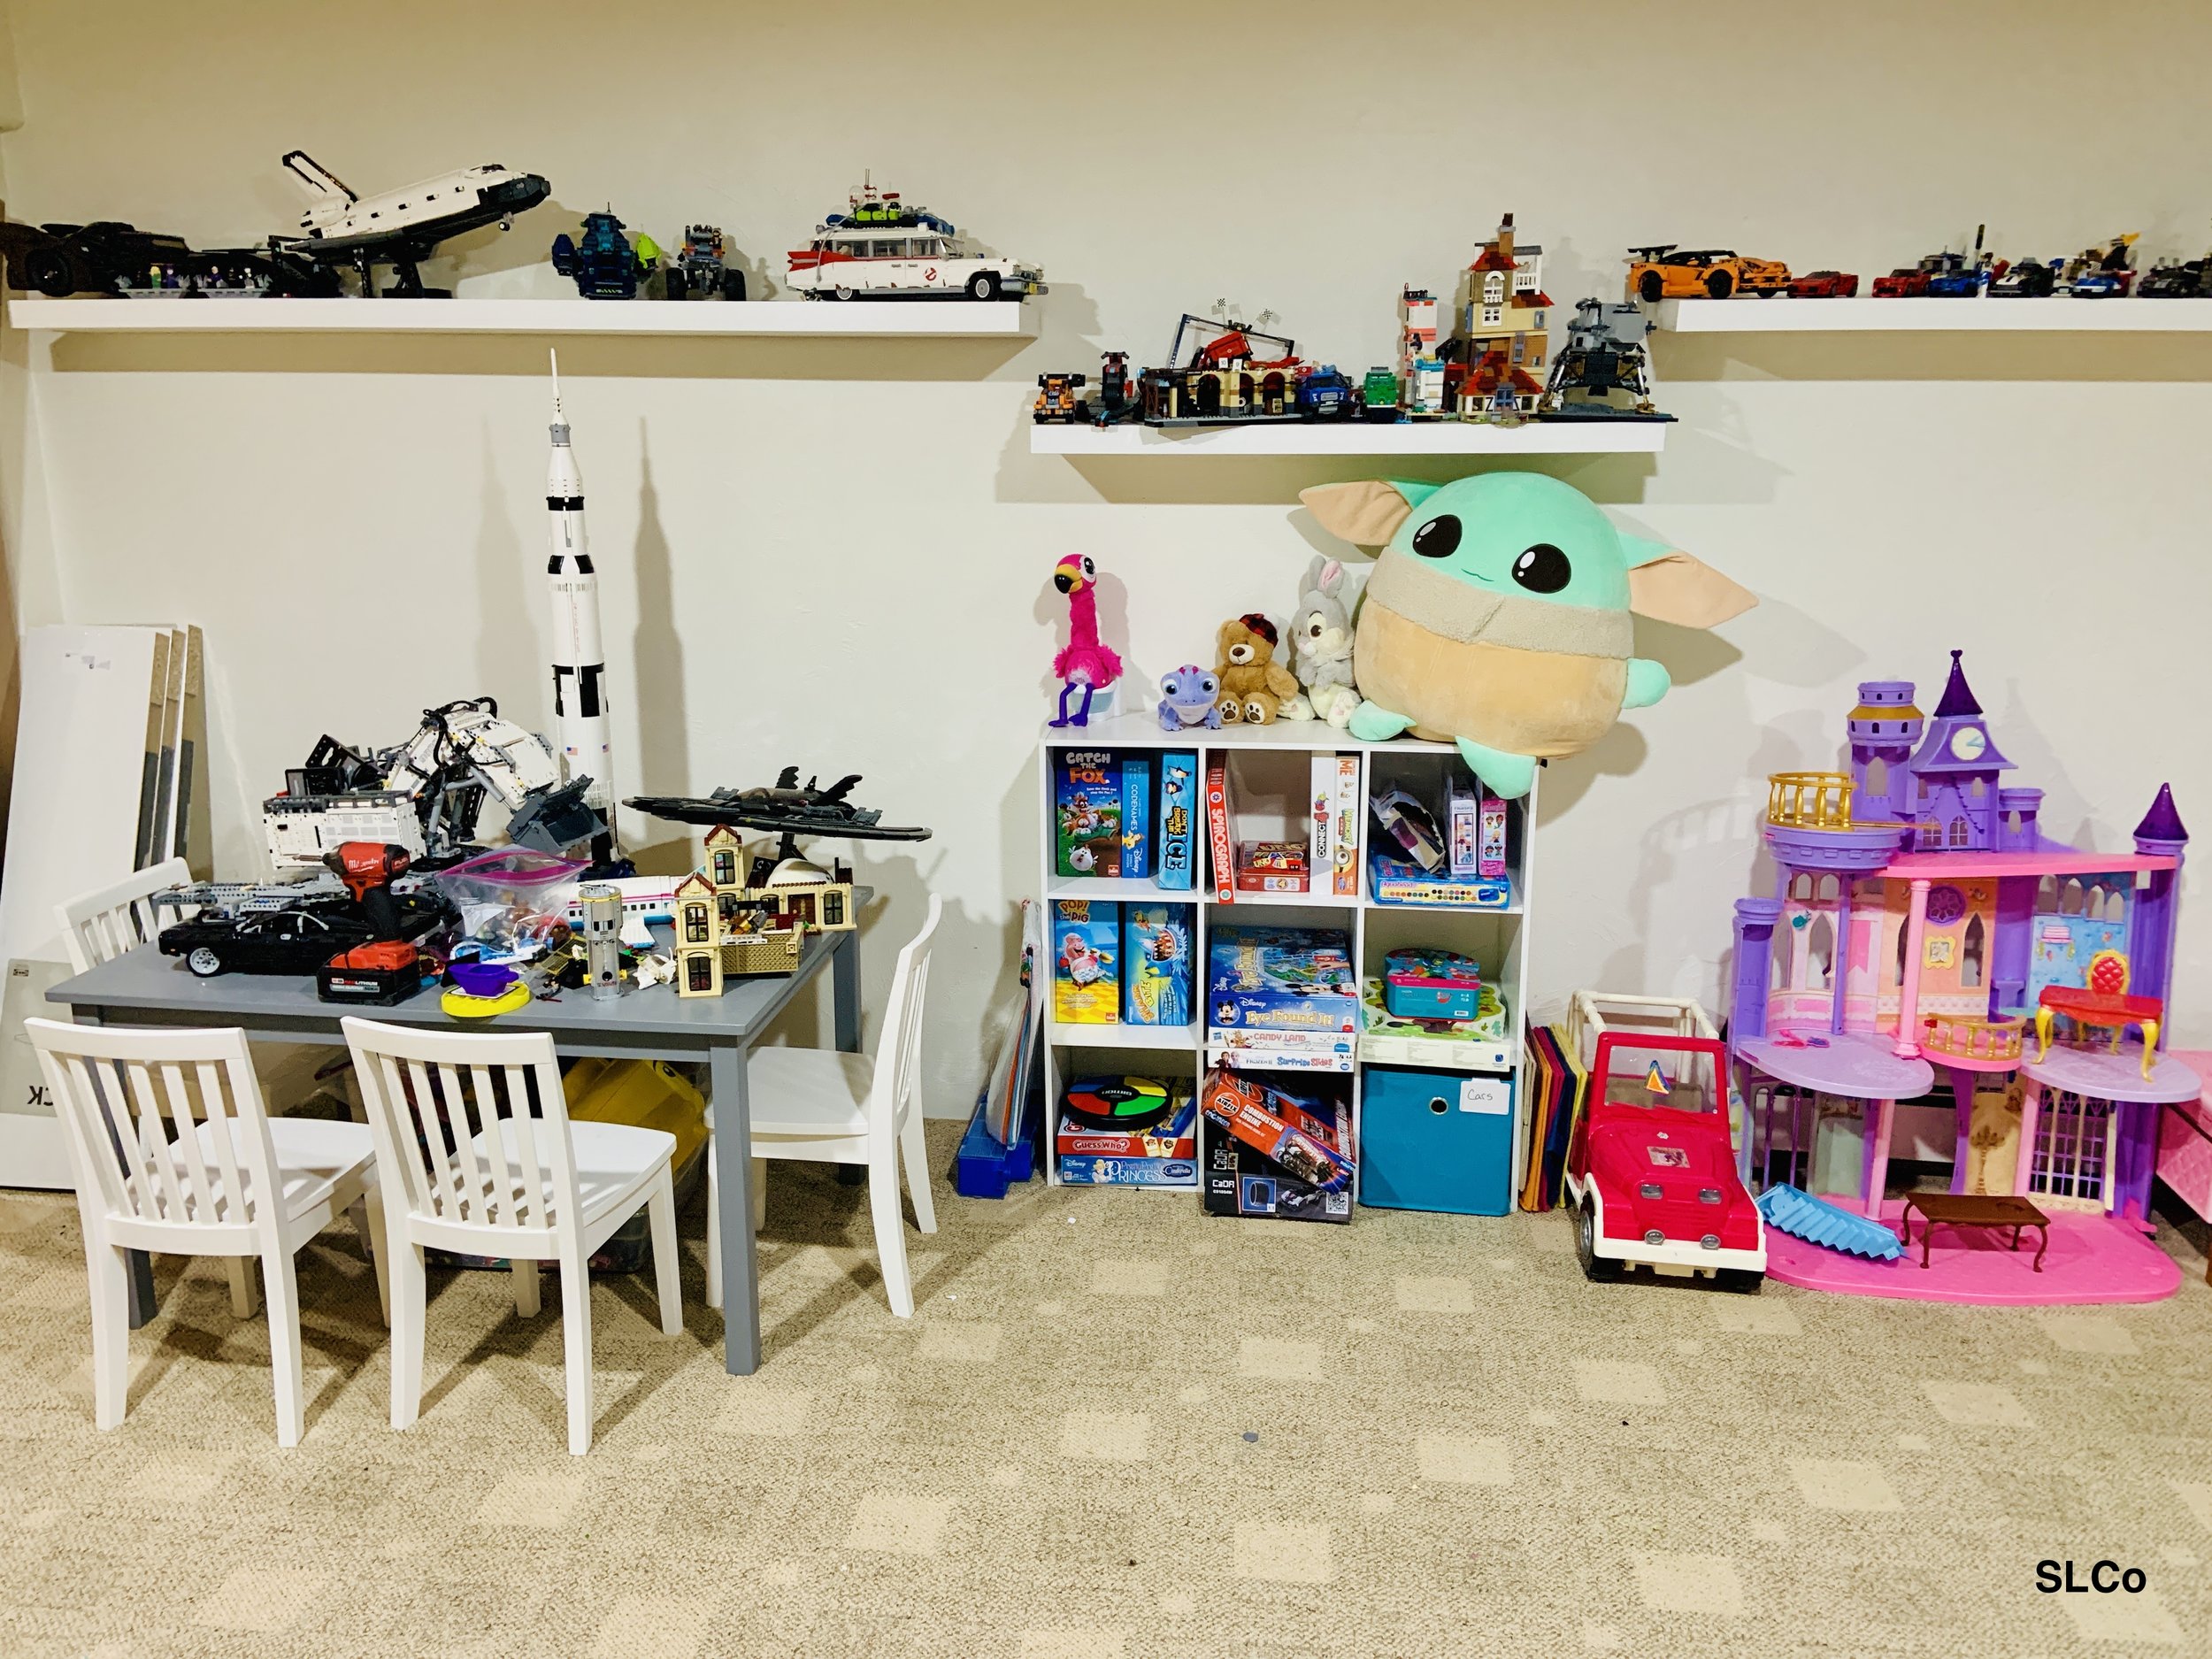 After photo of playroom wall with smaller desk and shelves with lego displayed and toys organized.